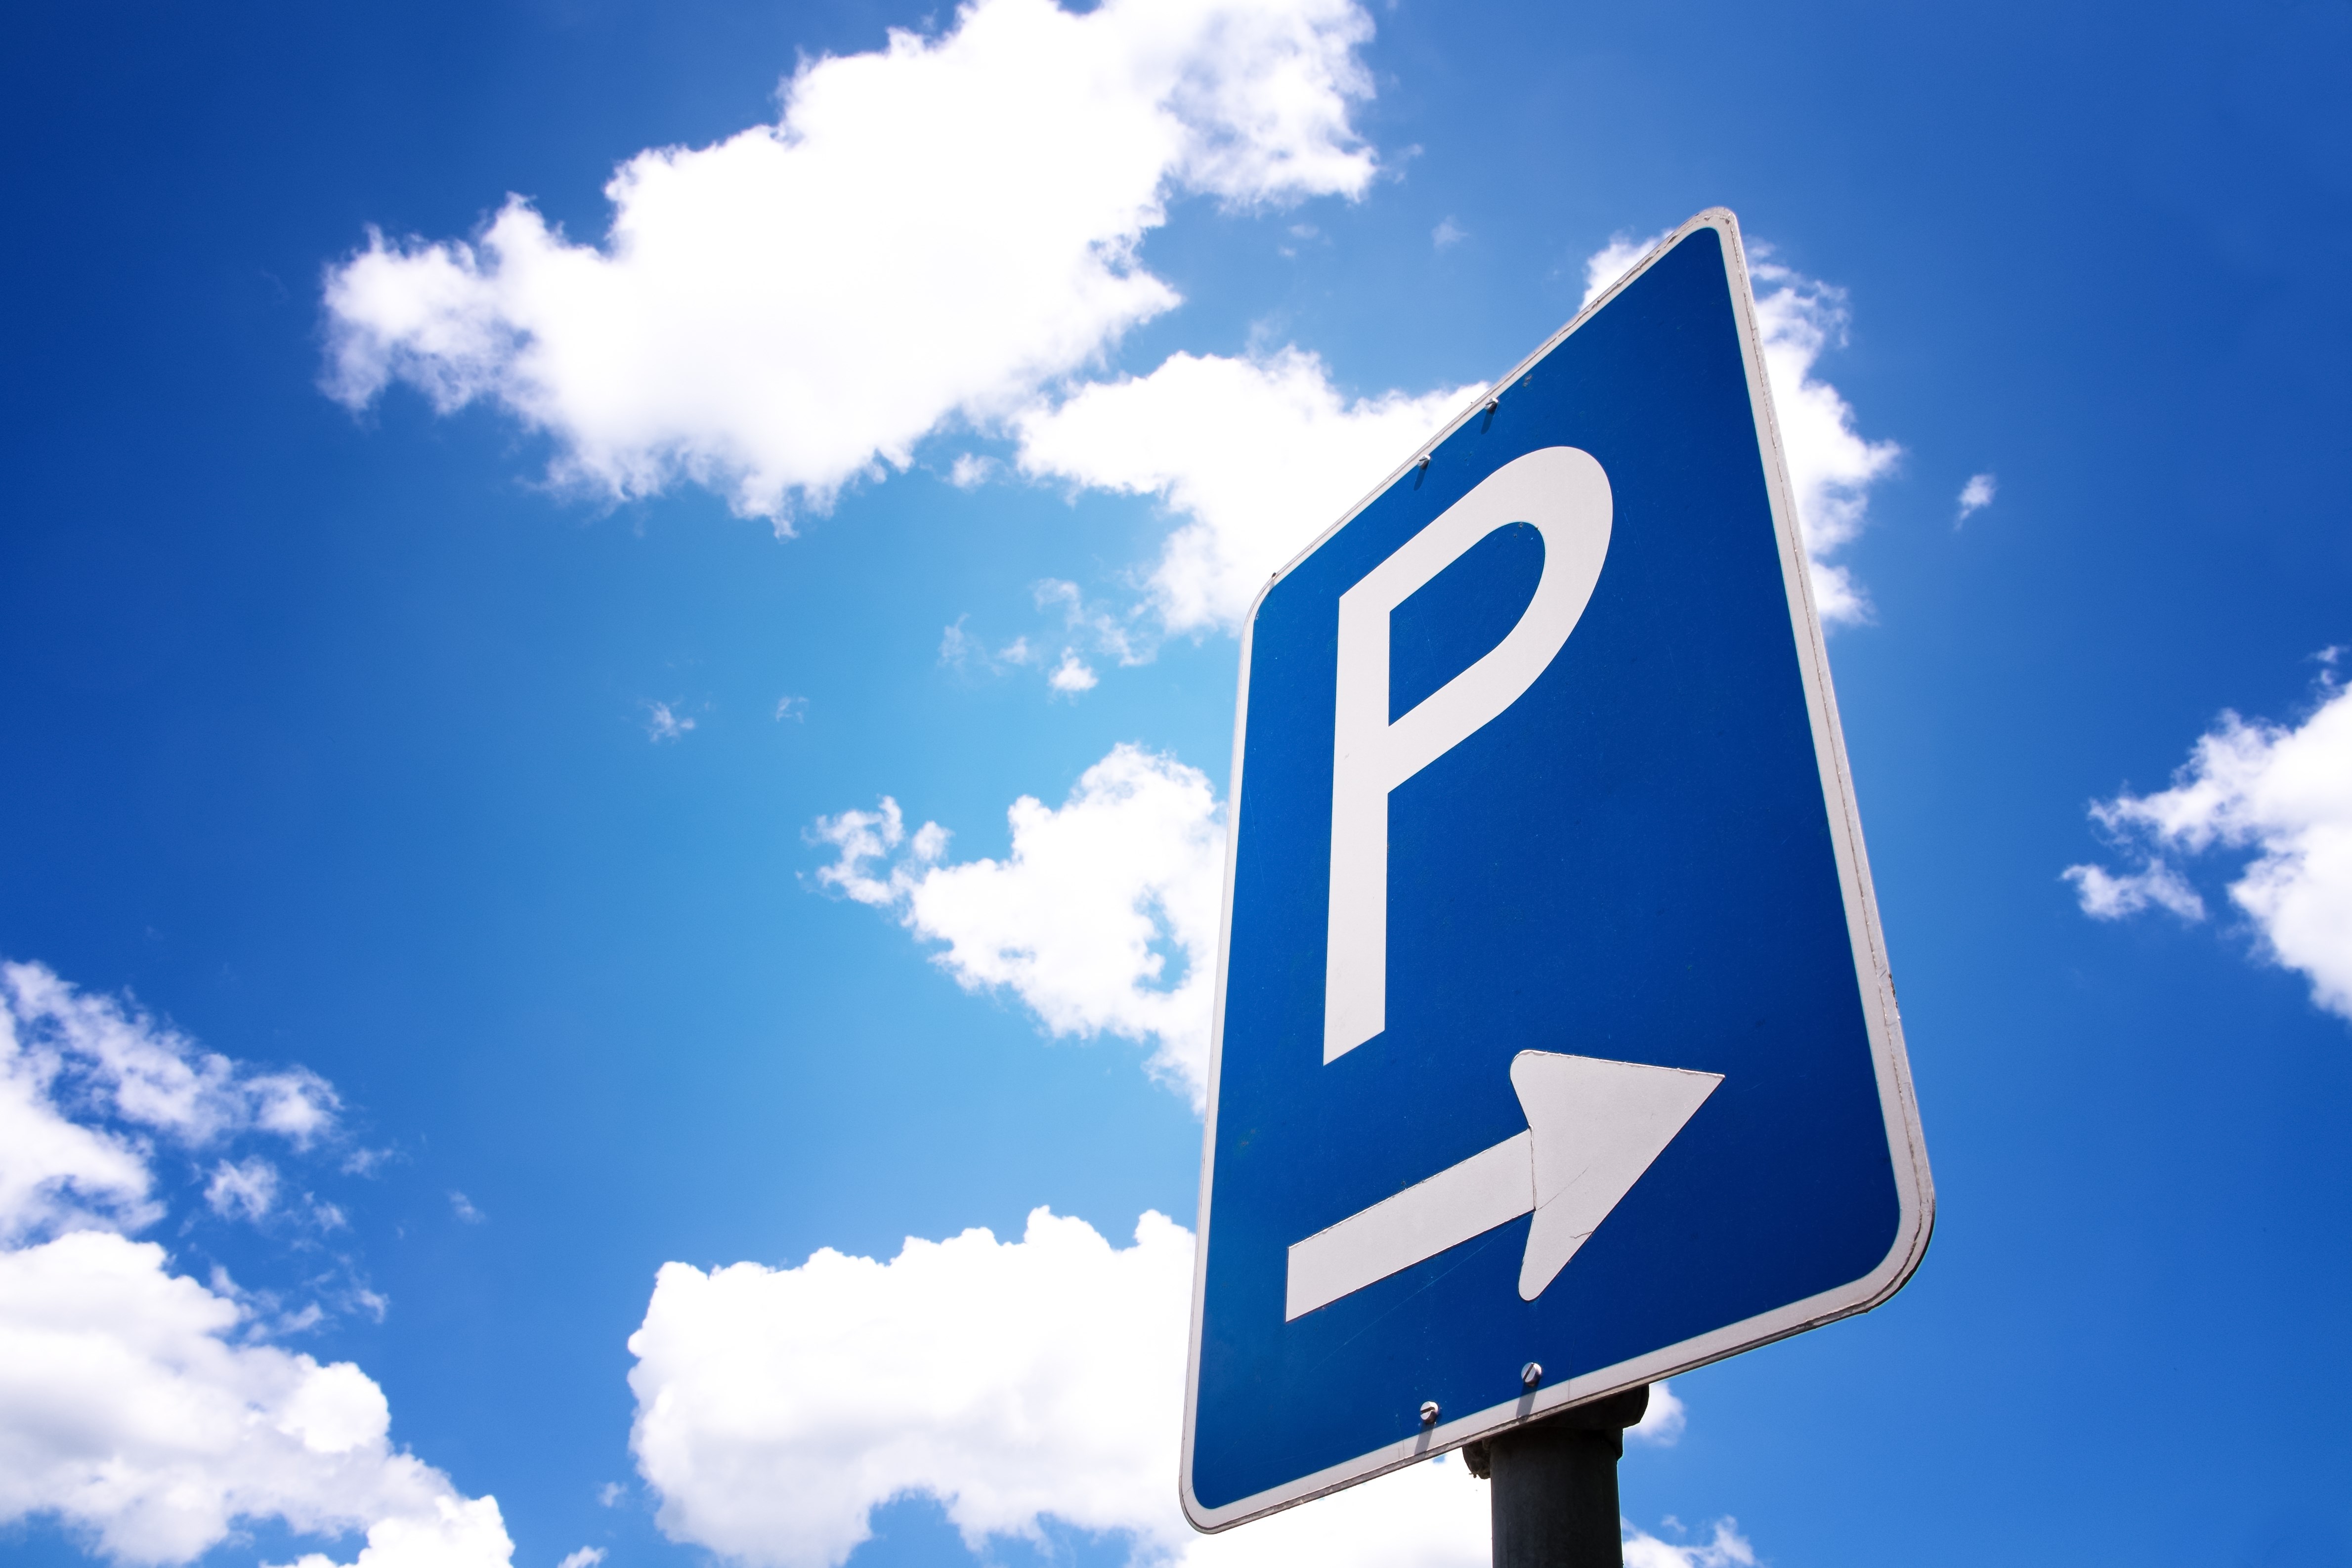 icon of P for car parking locations